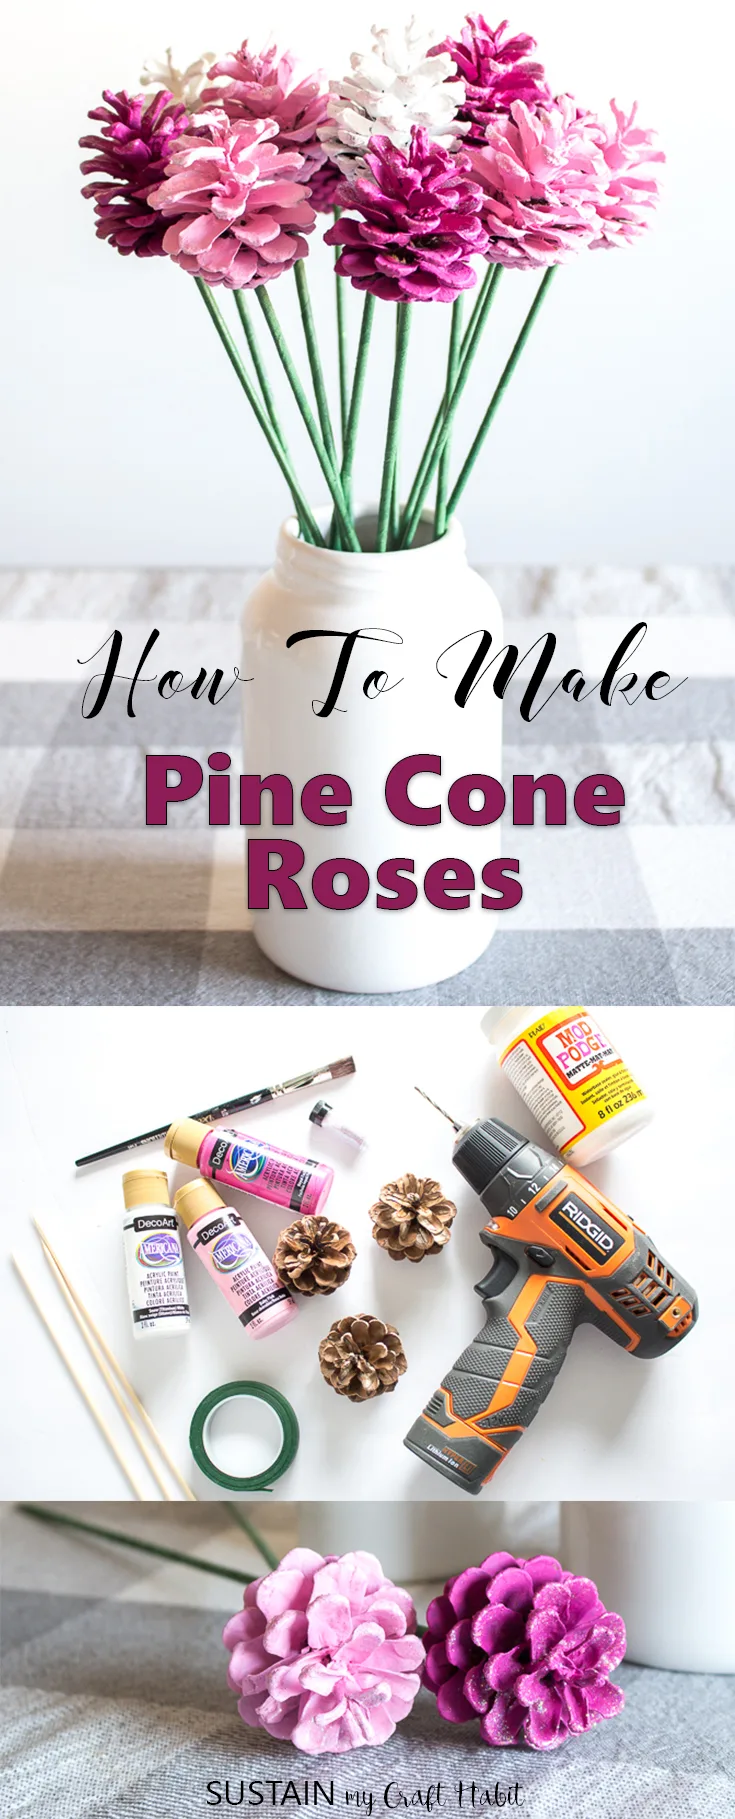 Supplies needed to make pine cone roses